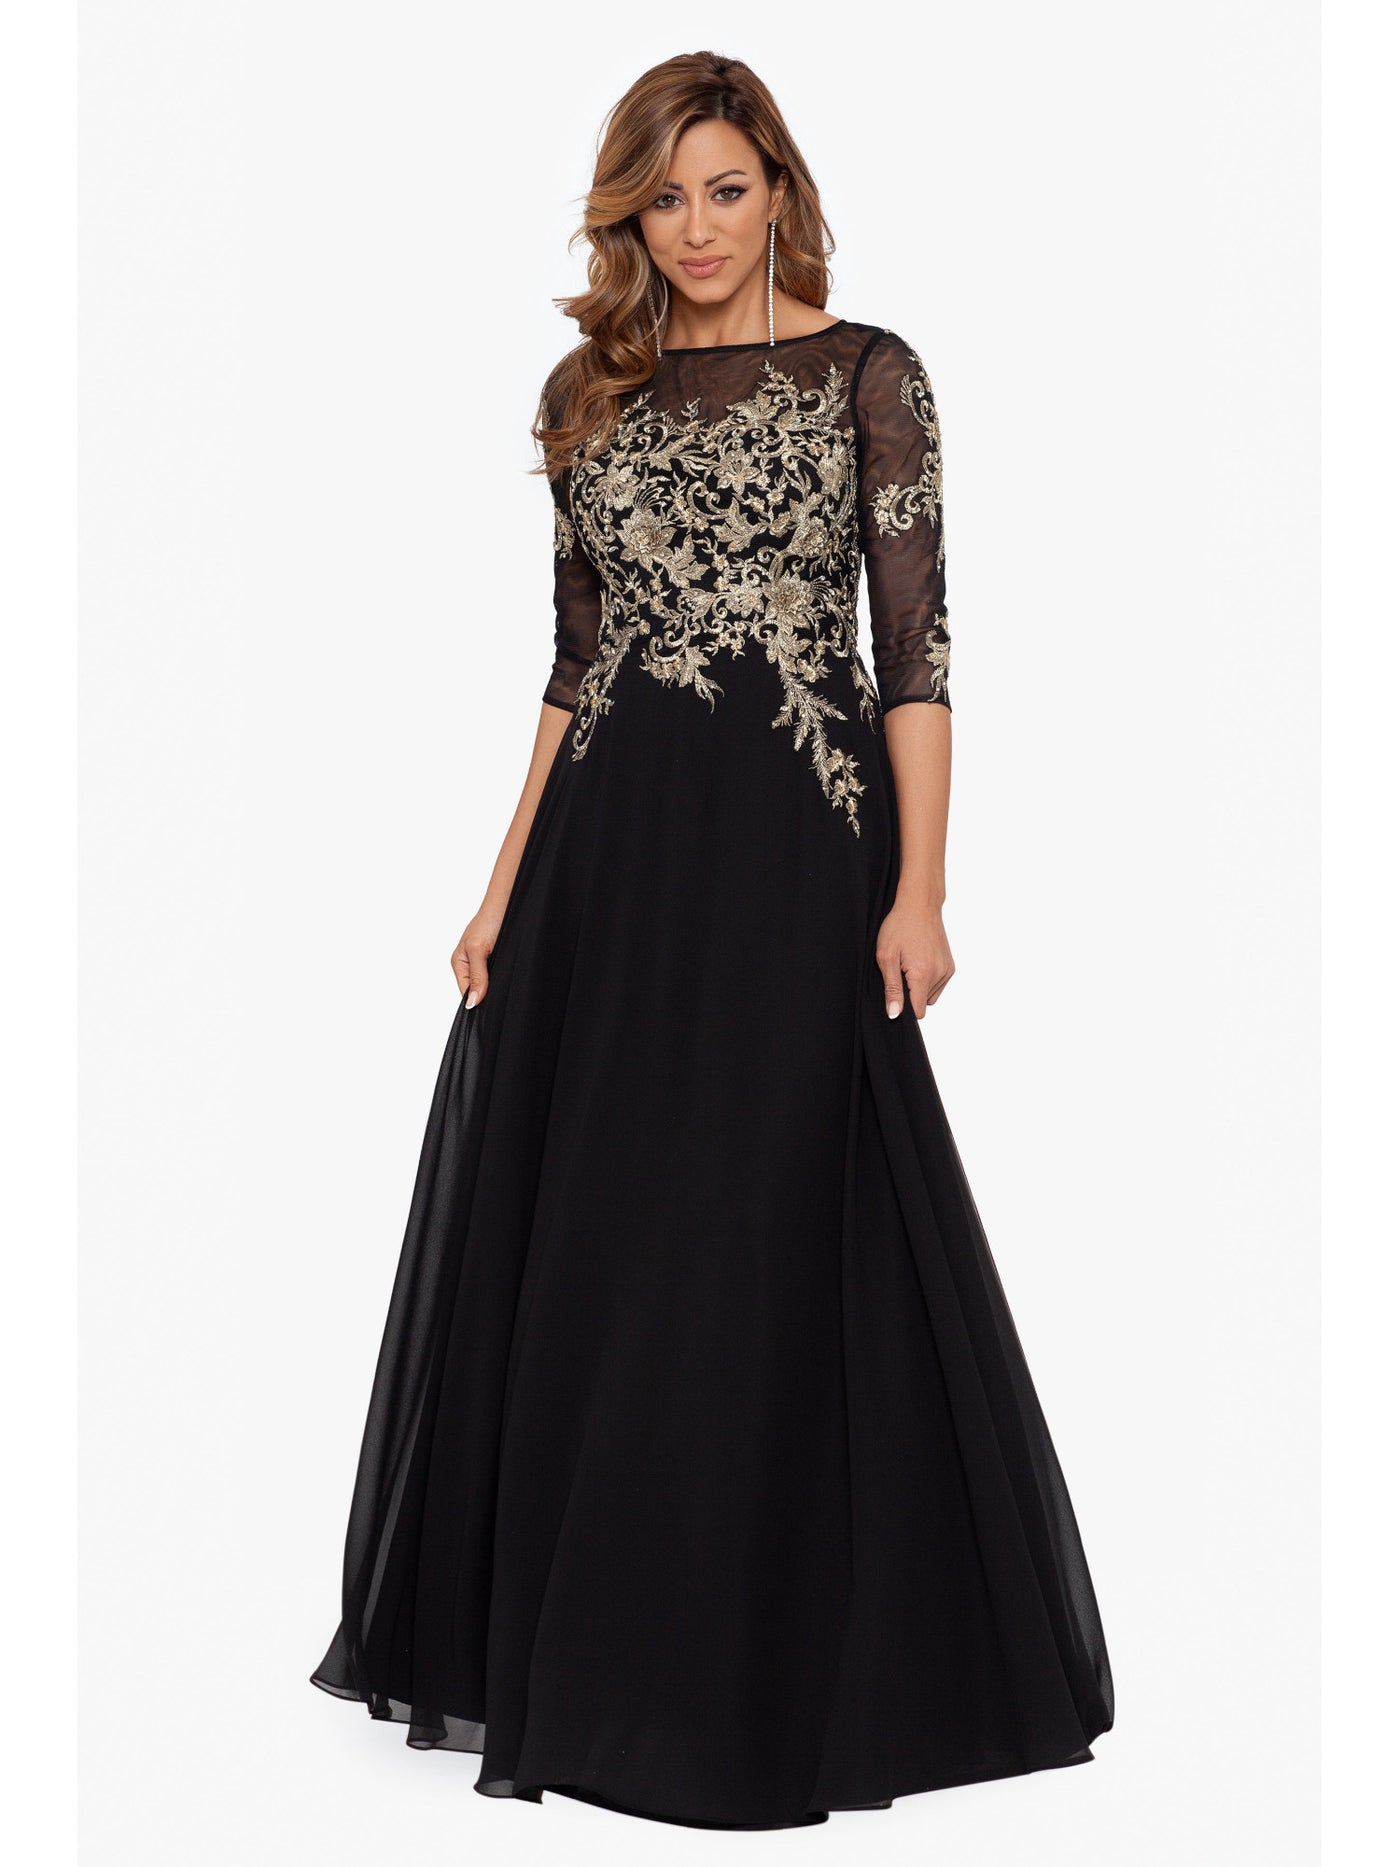 BETSY & ADAM Womens Black Embroidered Rhinestone Zippered Lined Sheer Padded Bust Floral 3/4 Sleeve Boat Neck Full-Length Formal Gown Dress 6